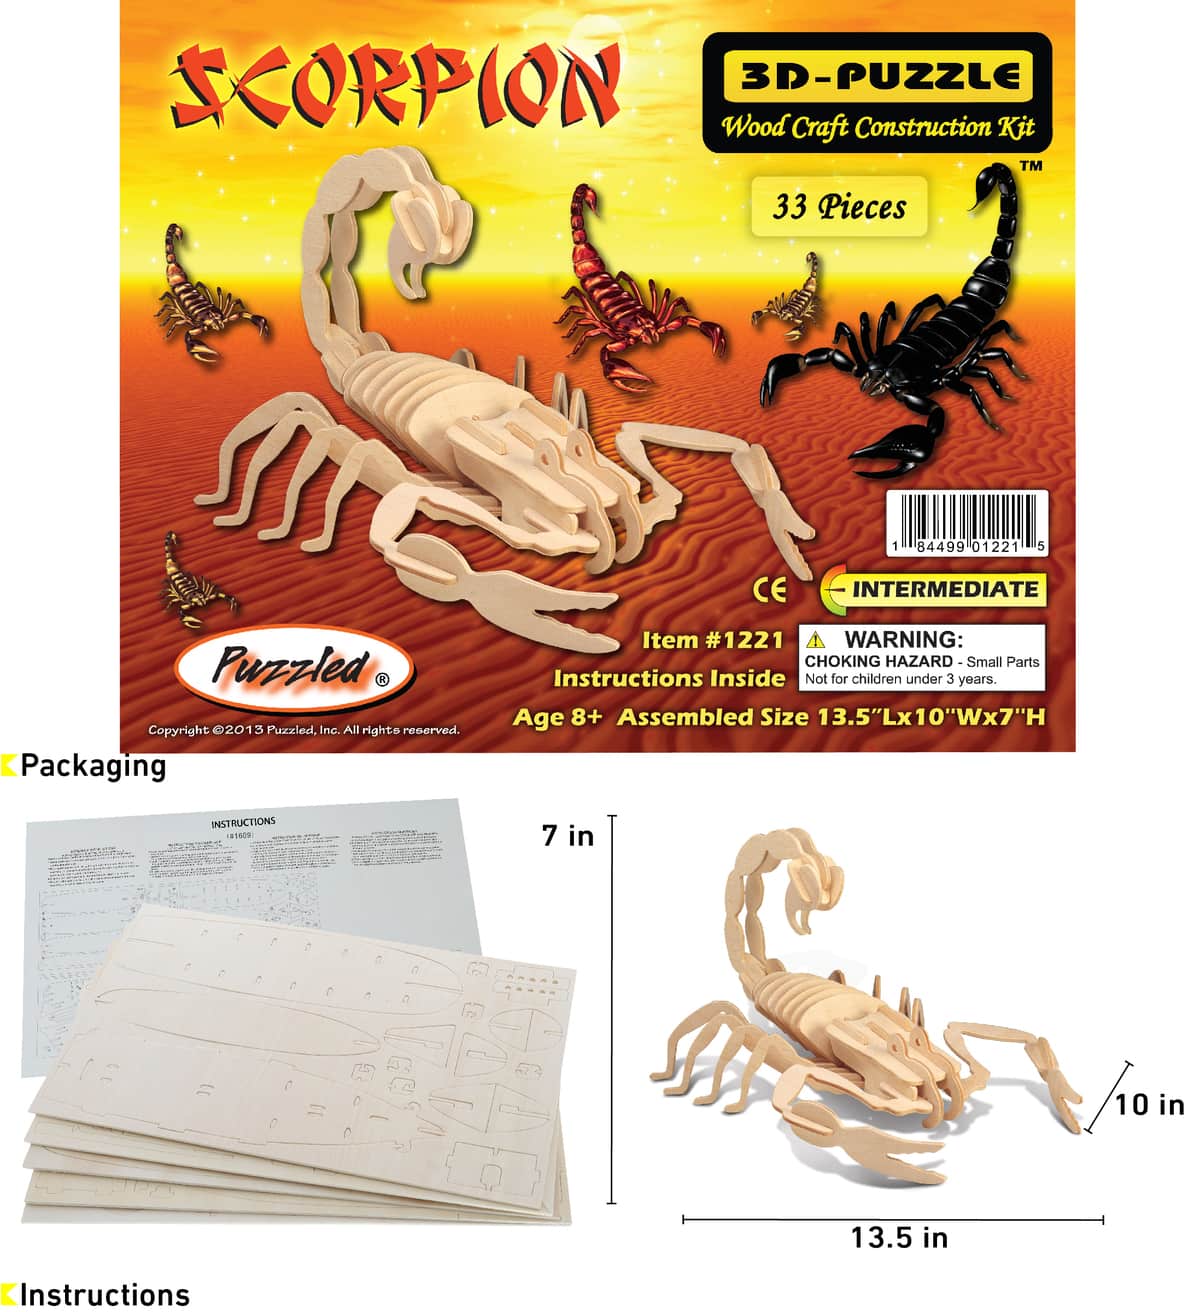 New Wood Assembly DIY toy for 3D wooden model puzzles of Animals Scorpion